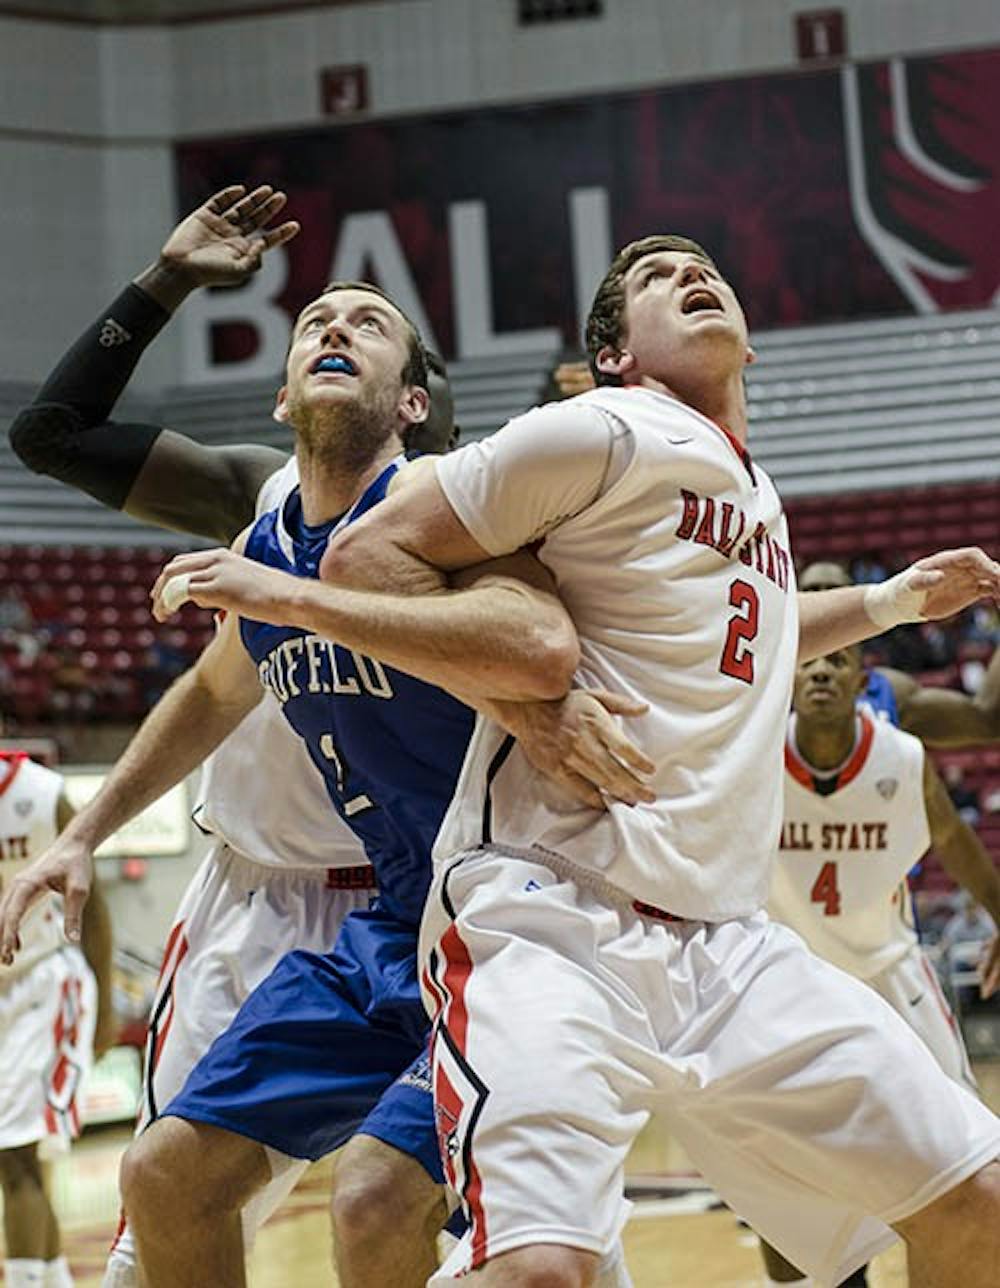 Ball State’s Matt Kamieniecki and Buffalo’s Will Regan wait for the rebound after Ball State misses a shot in the game against Buffalo on Jan. 23, 2013. Kamieniecki almost chose Western Michigan over Ball State. DN FILE PHOTO COREY OHLENKAMP